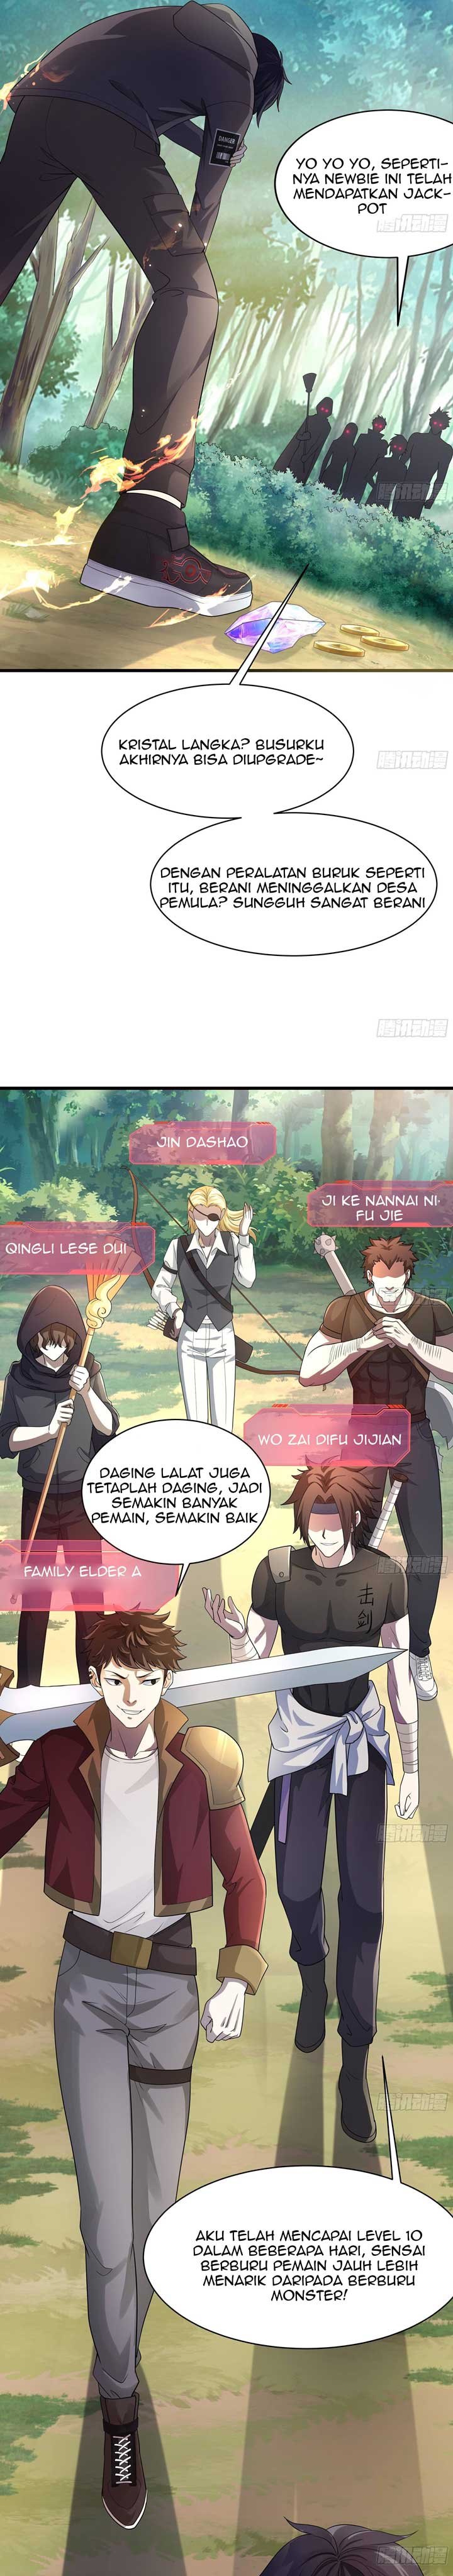 I Made A Harem In The Underworld Chapter 01